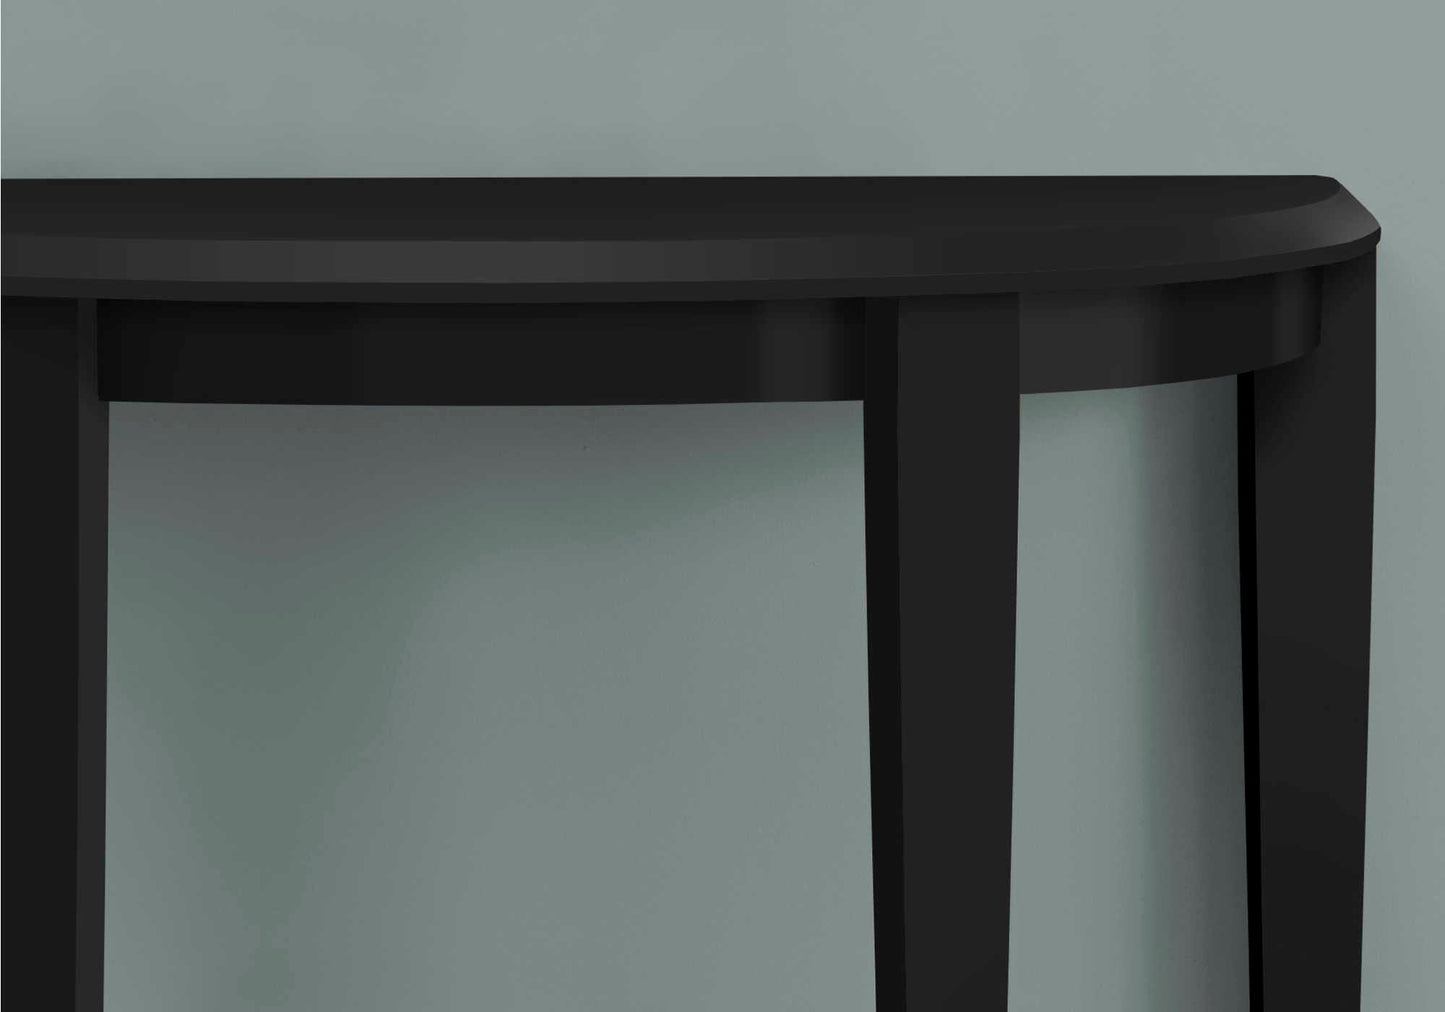 36" Two-Tier Bedroom Accent Console Hall Table